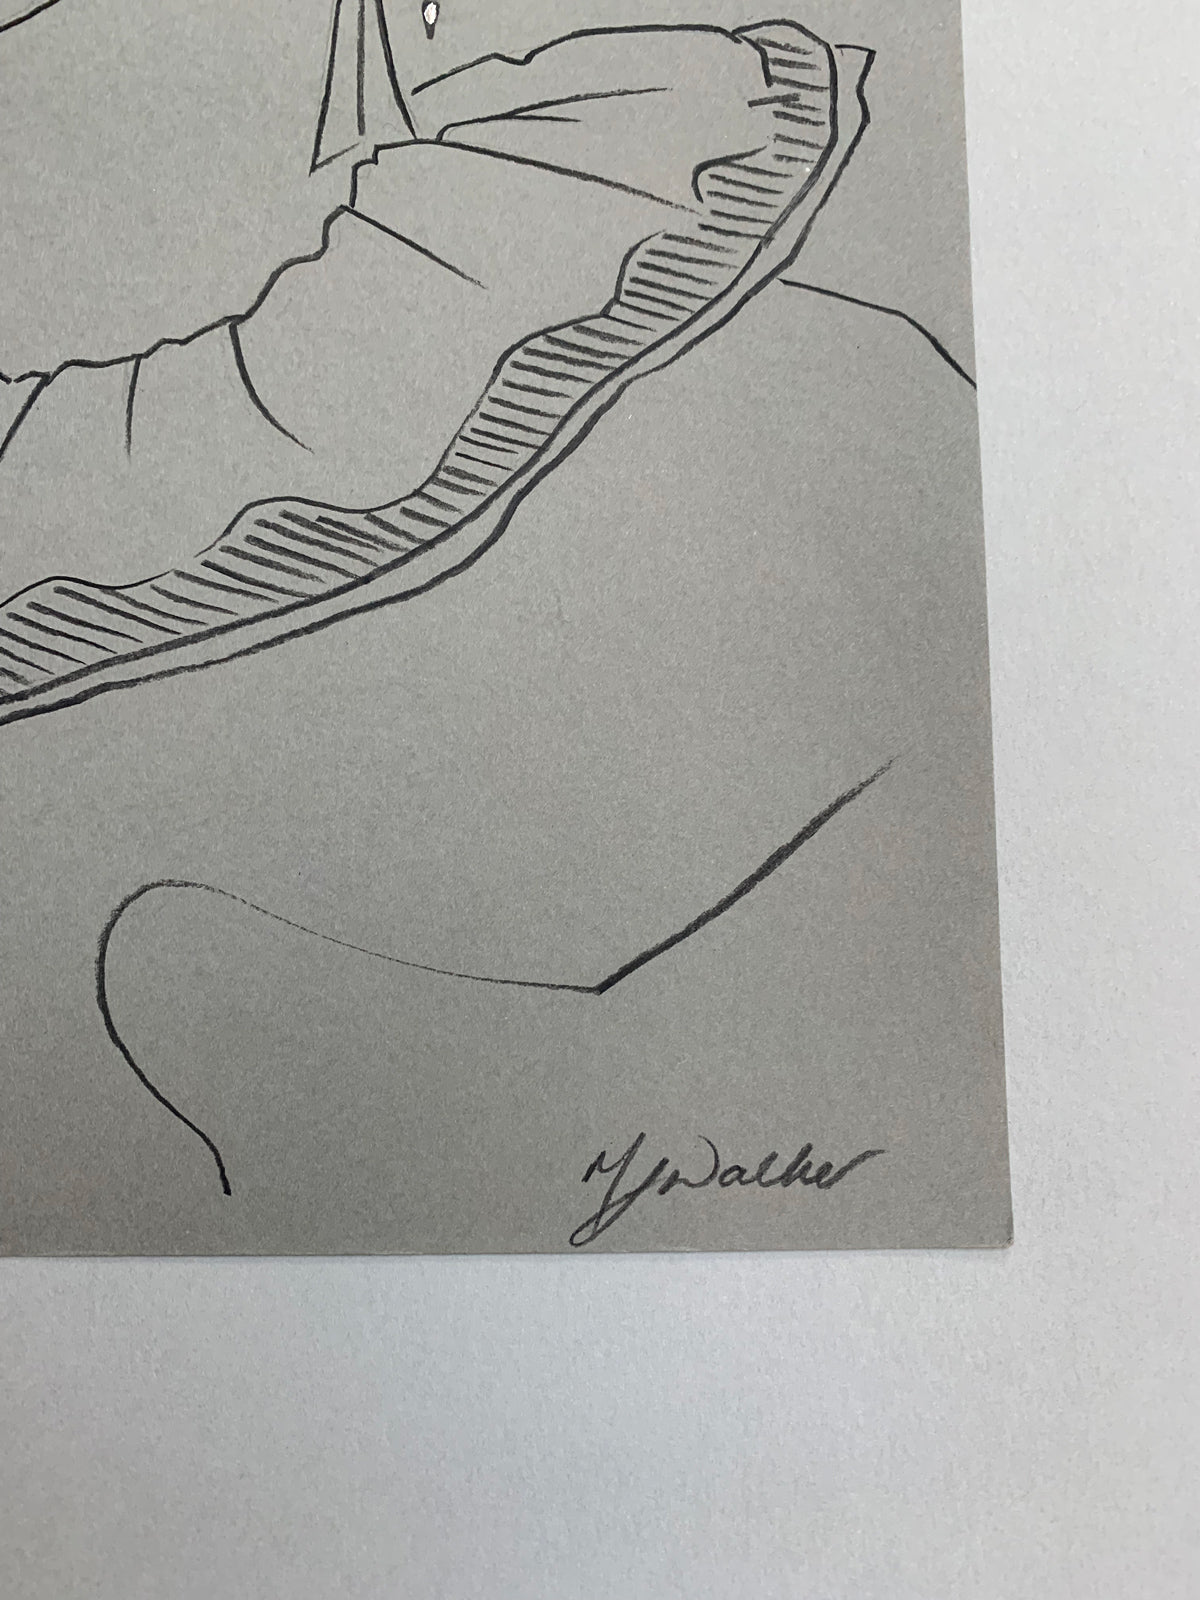 Melanie Walkers signature on her illustration with Tiffany x FIDA x Elsa Peretti; Snake earrings sterling silver.